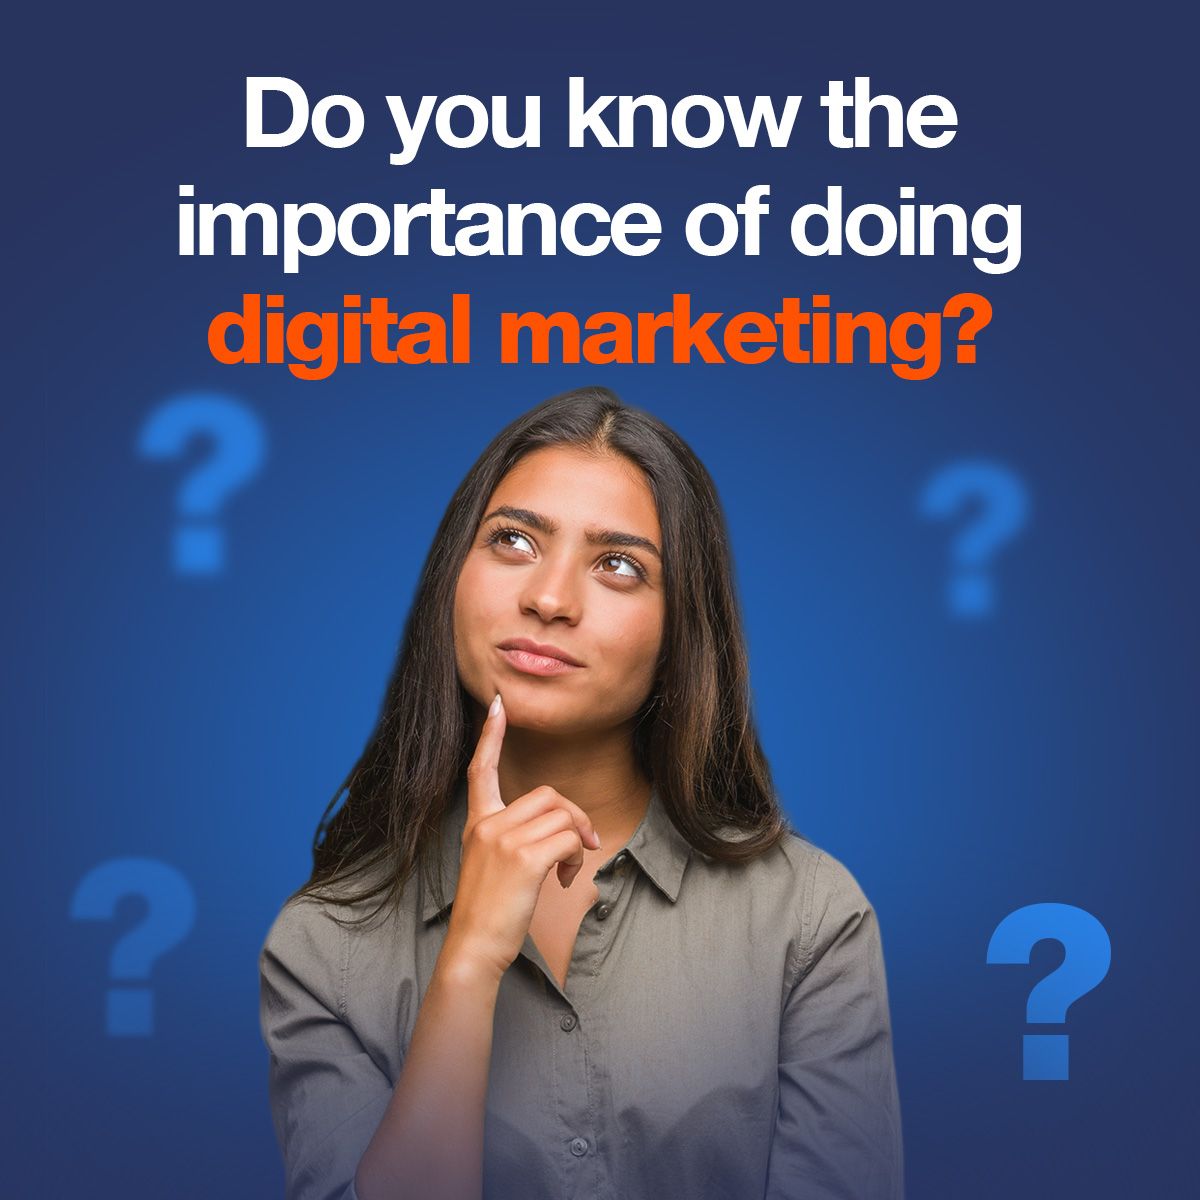 Do you know the importance of doing digital marketing?